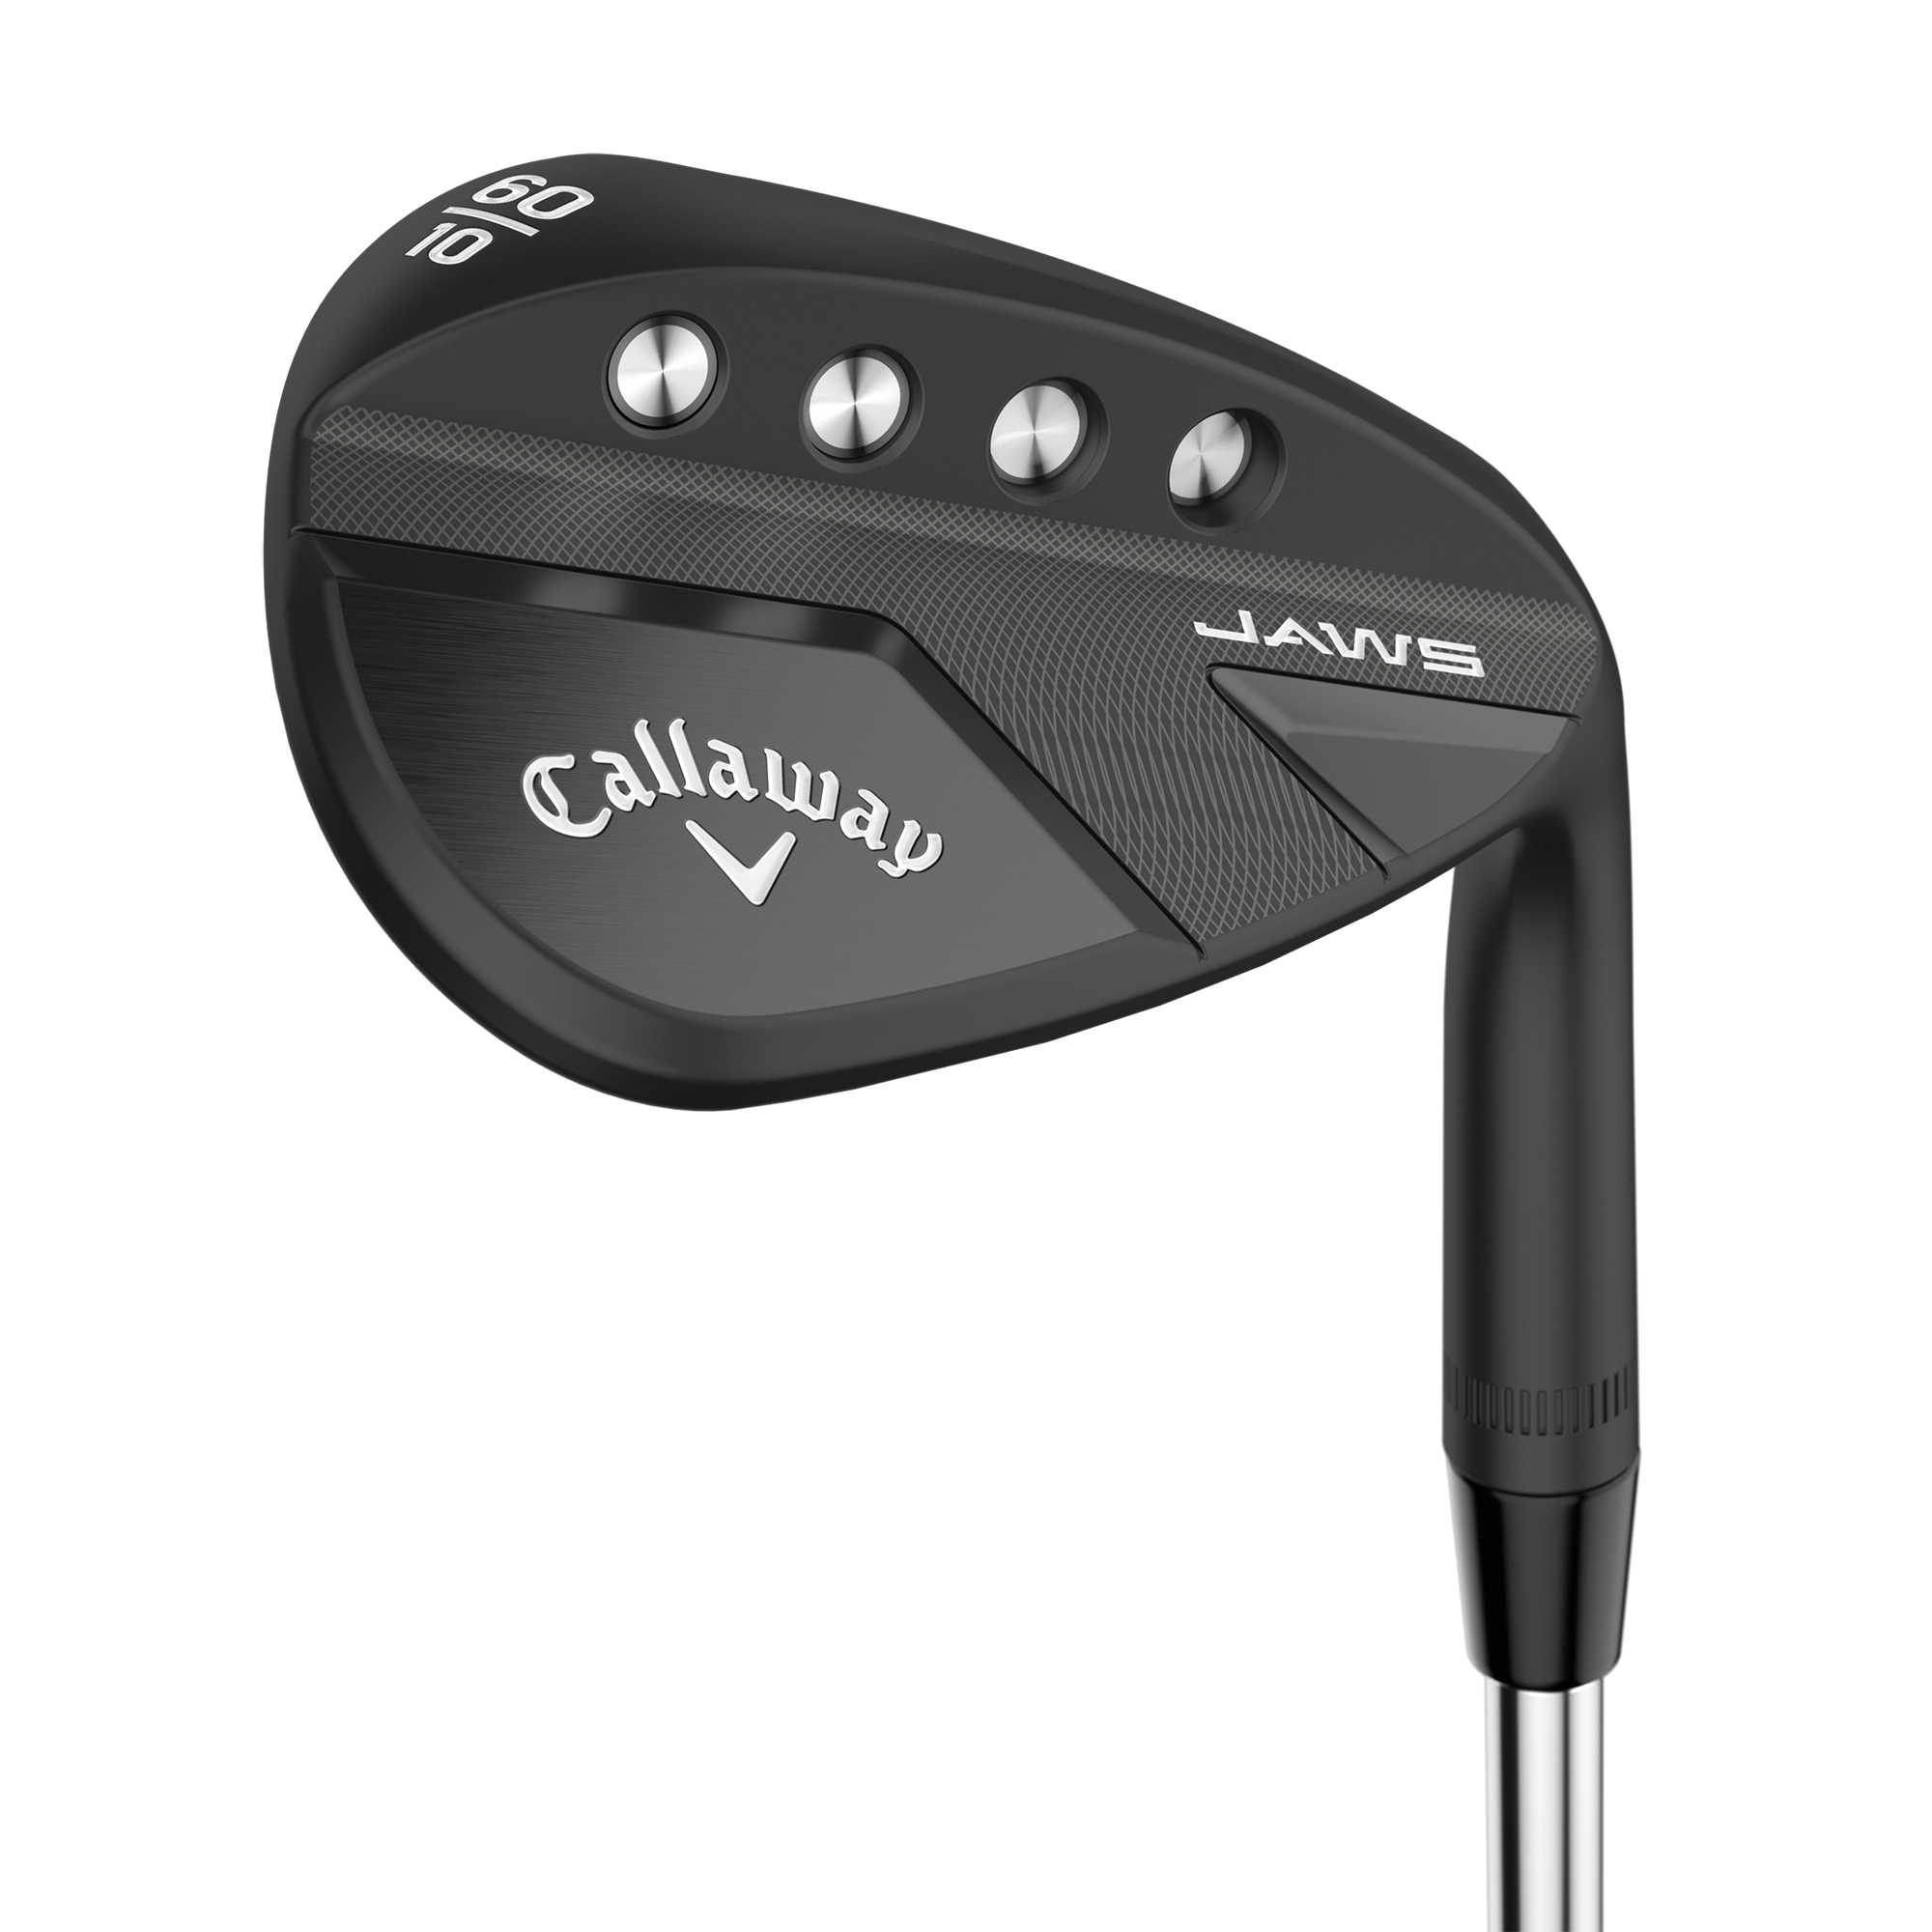 Callaway　JAWS　MD5 52S/10